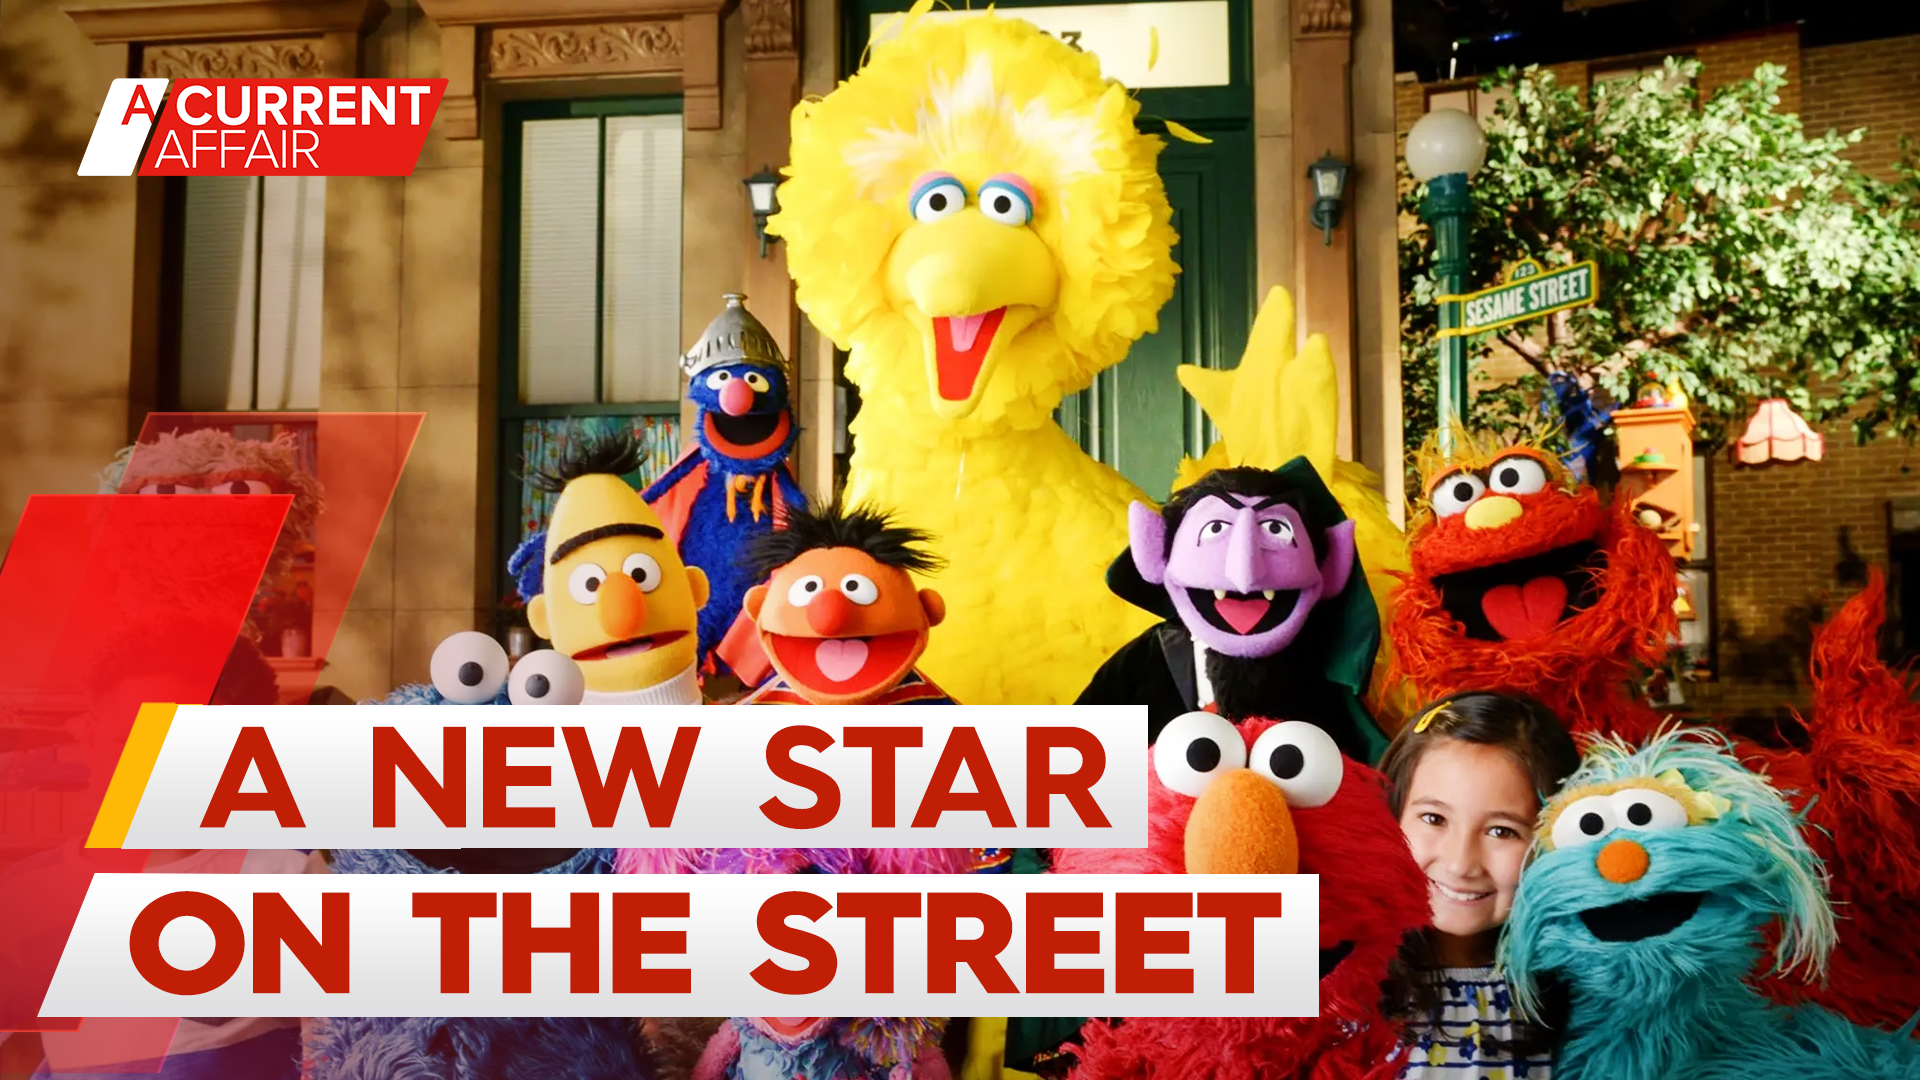 Aussie mum's small business catches attention of iconic kid's show Sesame Street